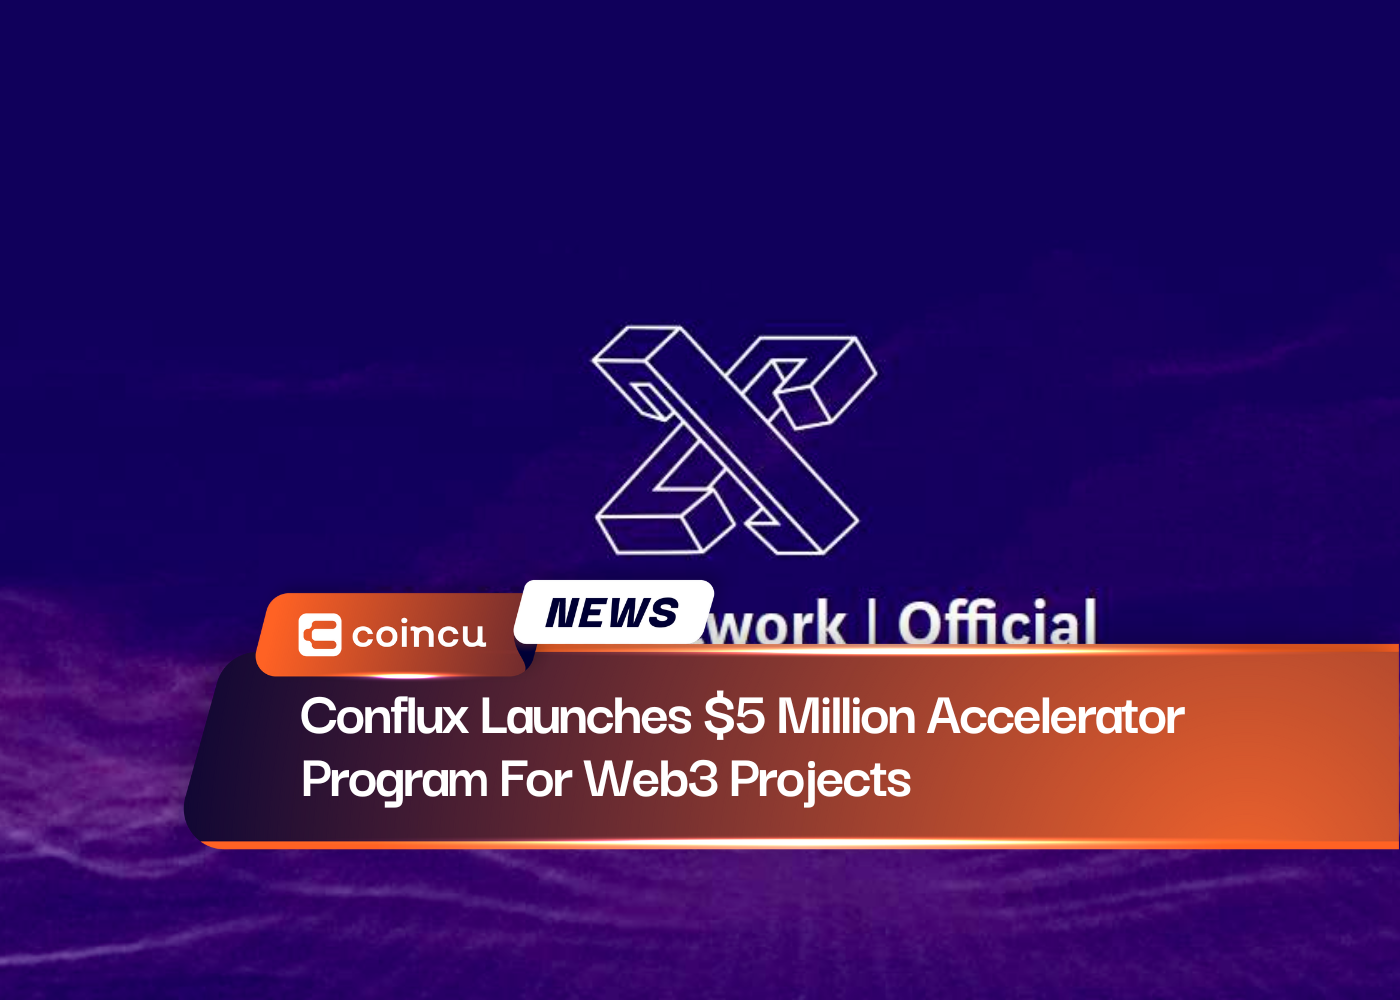 Conflux Launches $5 Million Accelerator Program For Web3 Projects